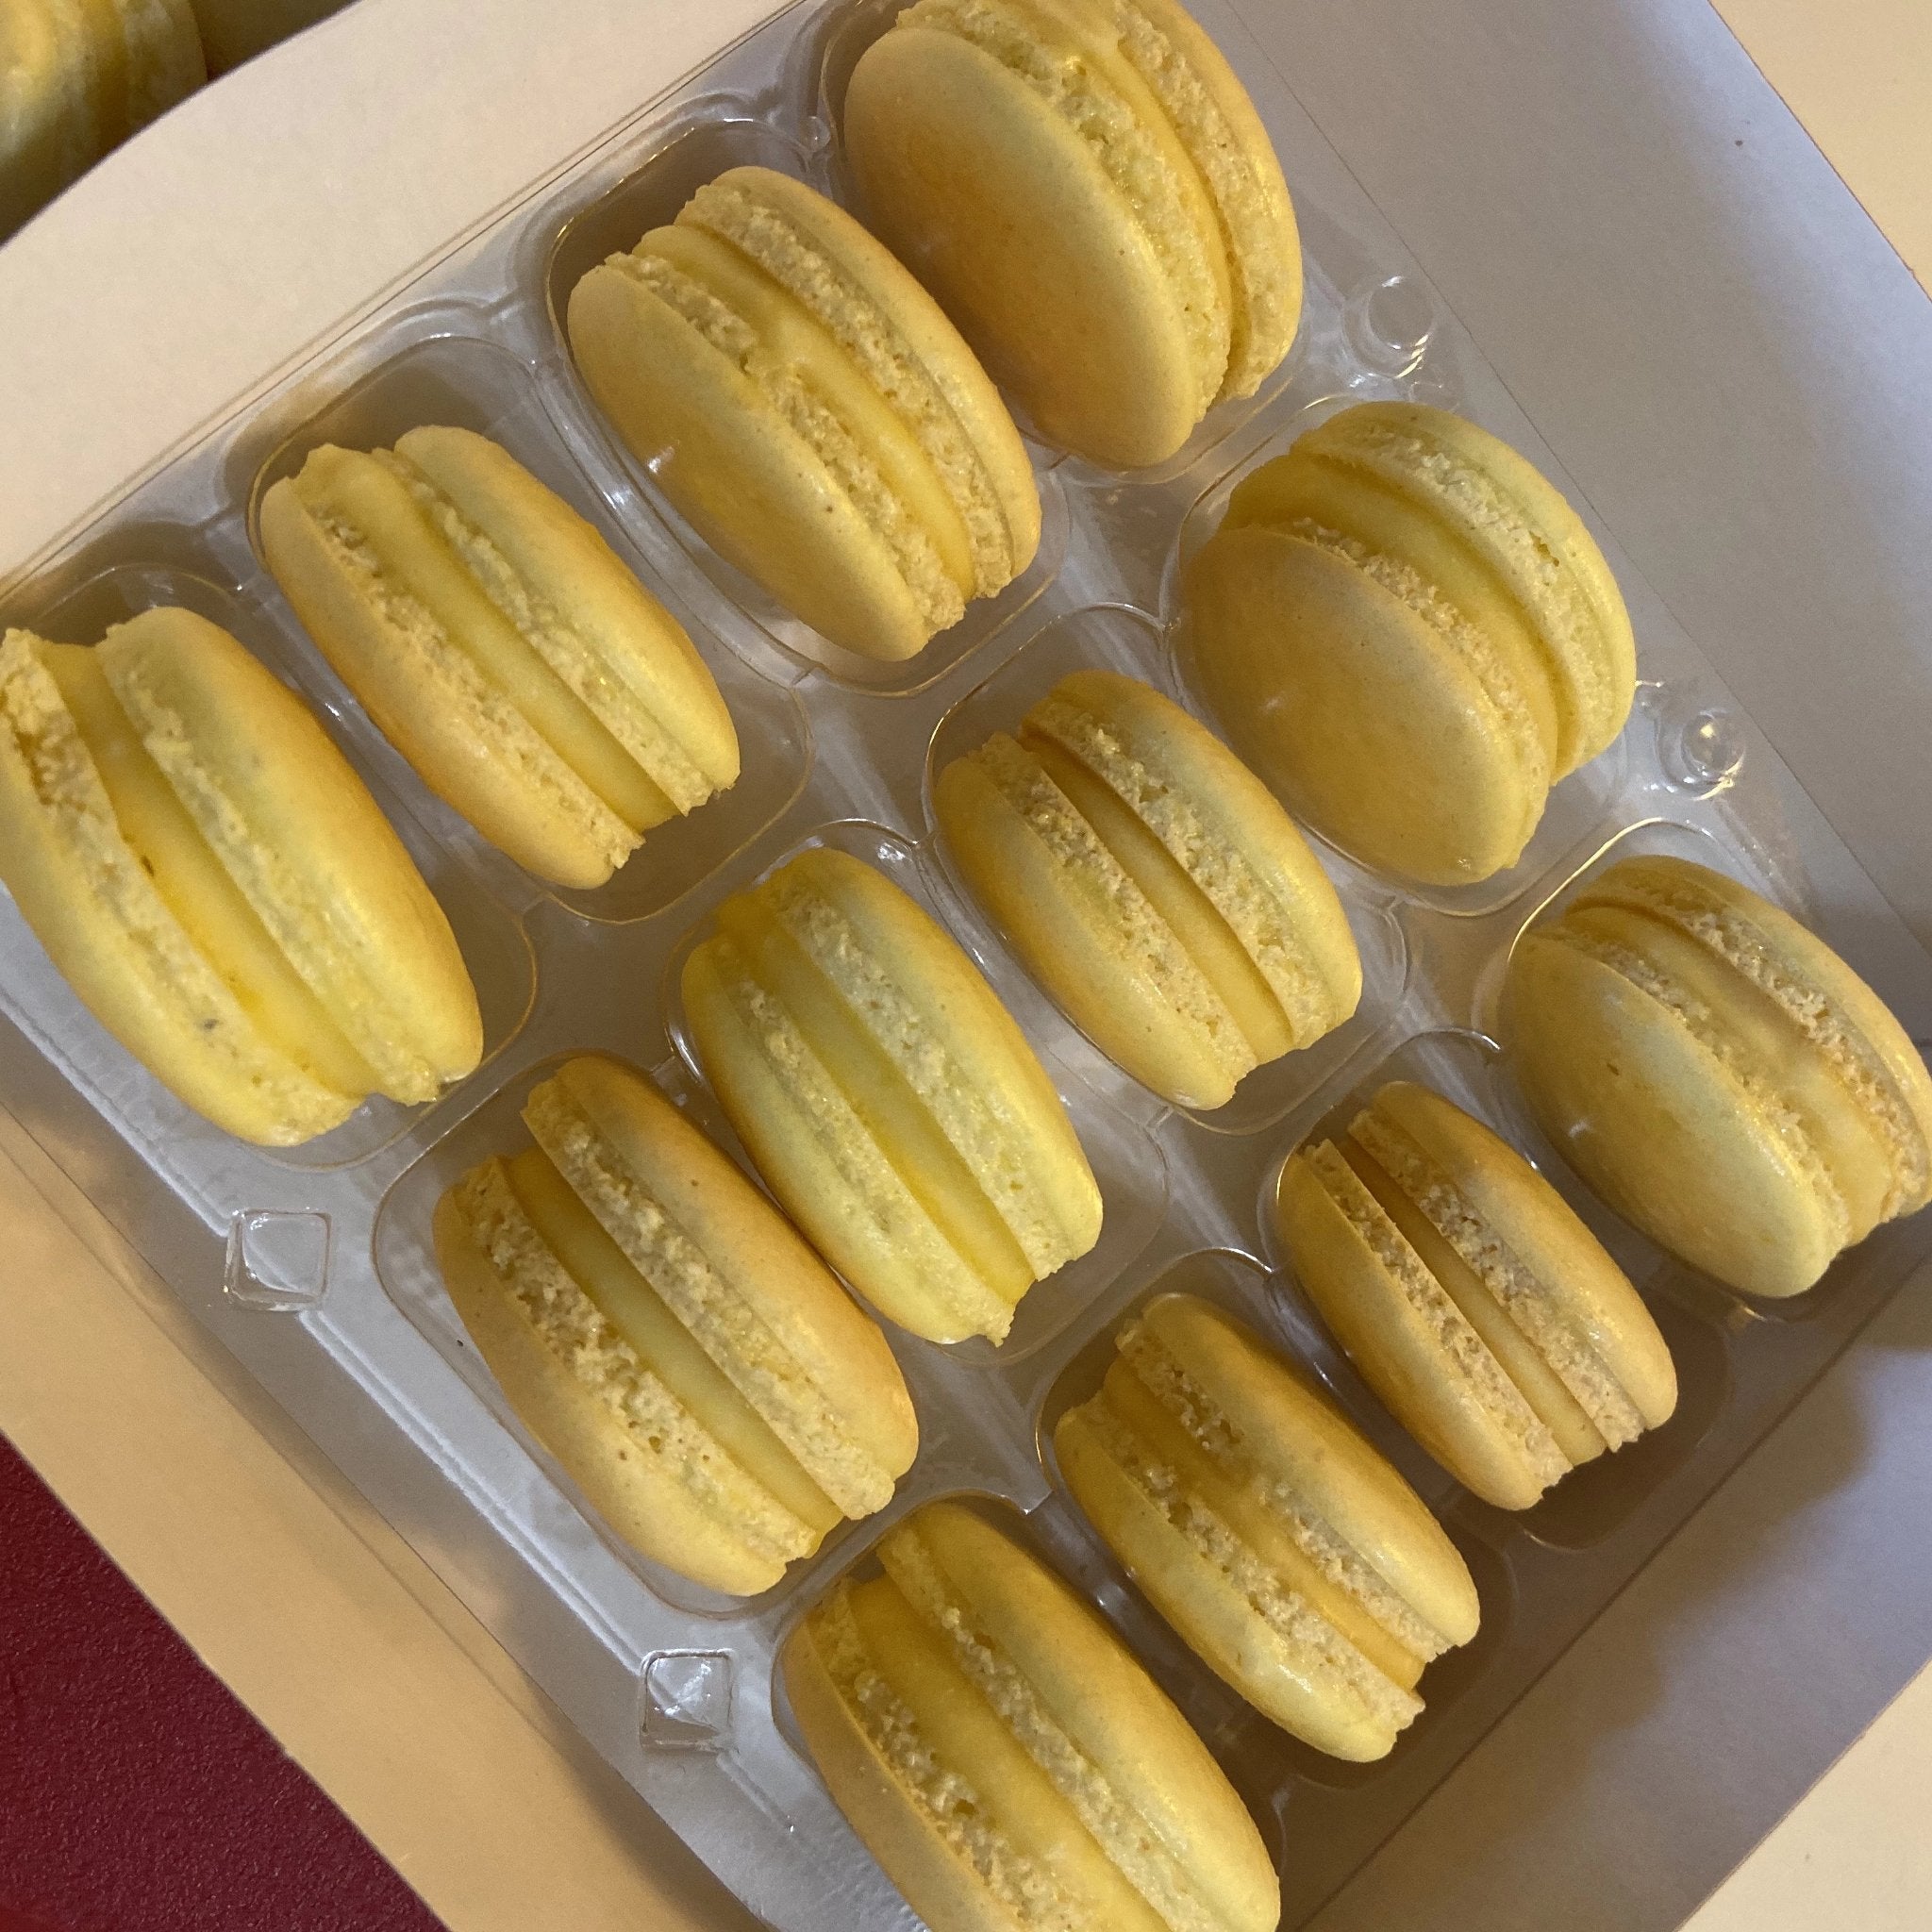 Lemon Curd French Macarons (Box of 12) Evelyn R. Cooke - The #EvCooks Store